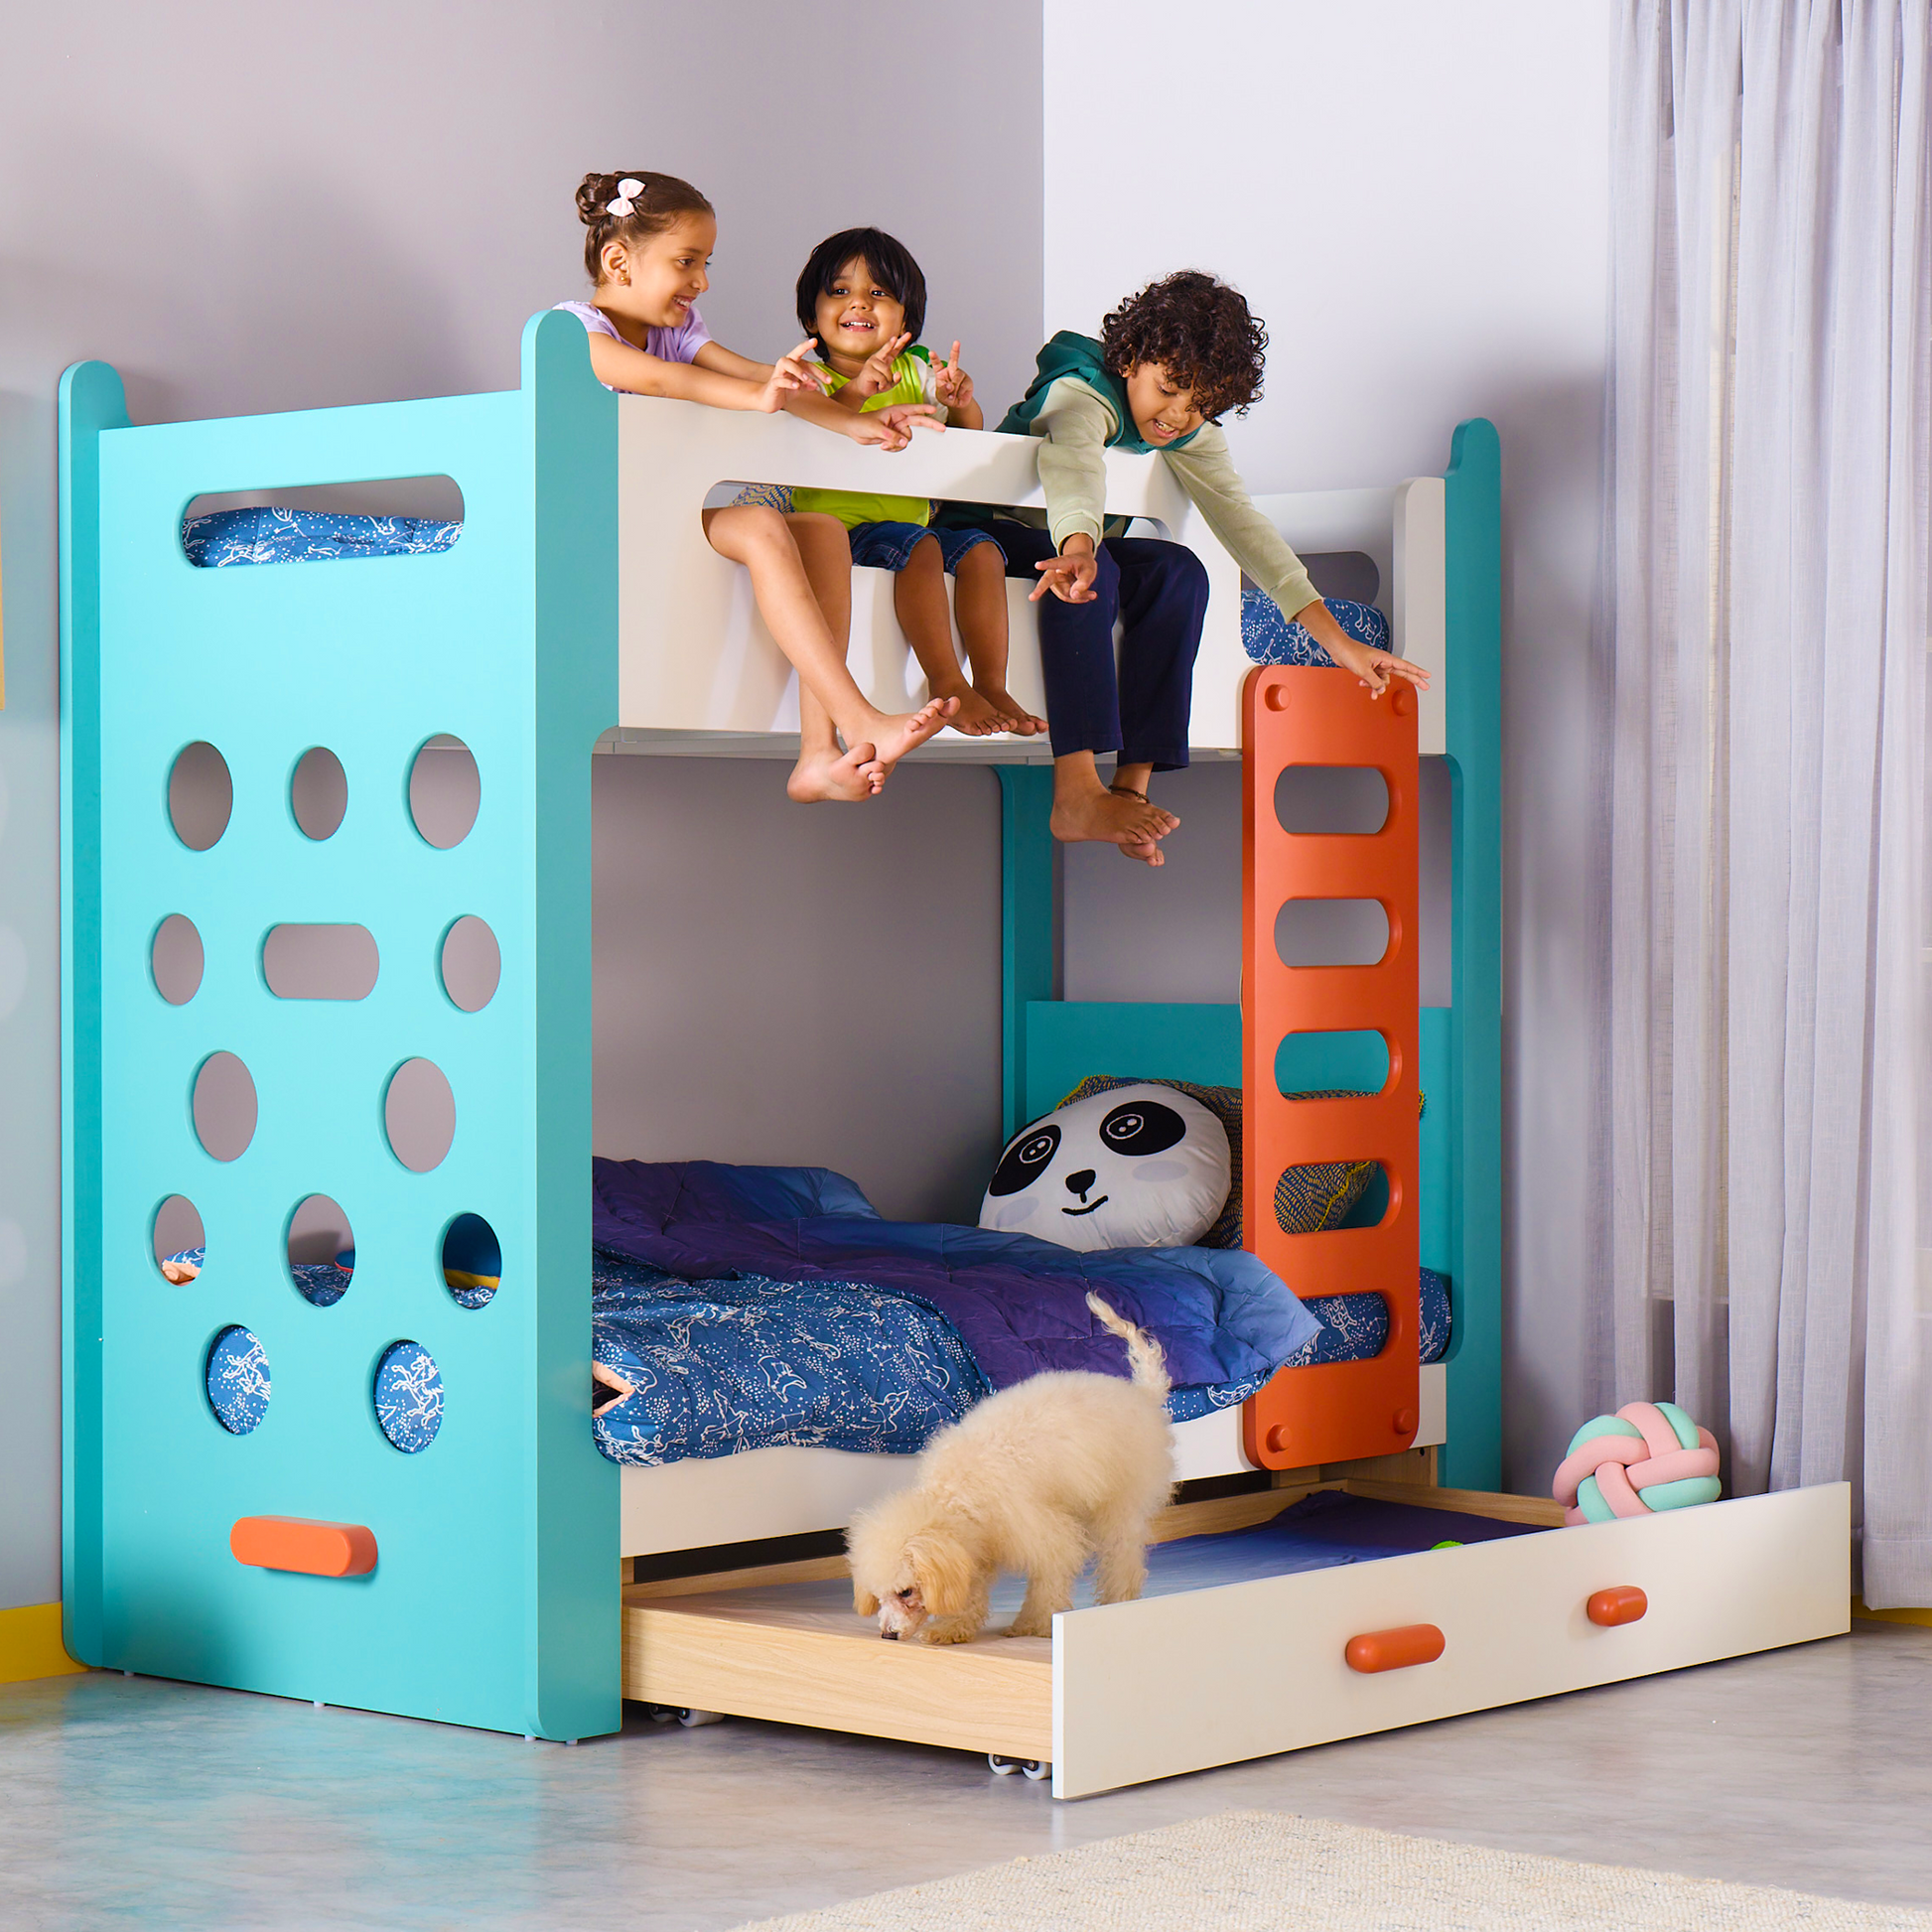 media_gallary Climbr Bunk Bed with 2 Mattresses 4